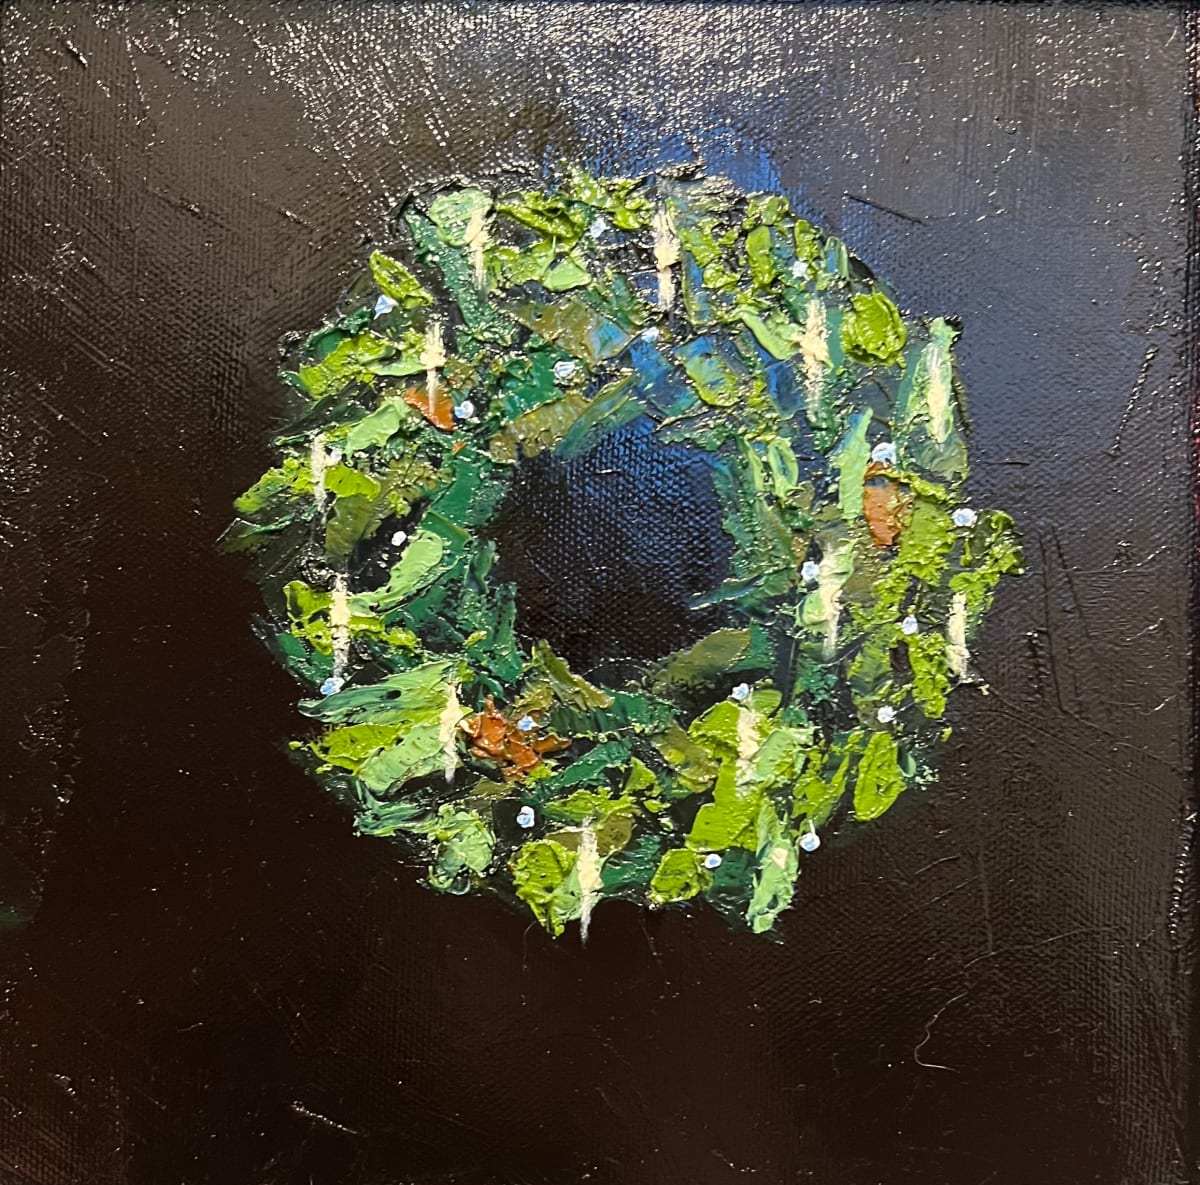 Wreath 1 by Mary Kamerer Impressionist Painting  Image: As if set against the stillness of a winter’s night, this wreath is textured oil paint against a nearly-black palette knife background. Shades of green form a simple, natural wreath with only the sparkle of white lights illuminating from among the branches. Painted on canvas, this artwork is framed in a black wood museum-style frame and is wired and ready to hang. Limited edition of four.